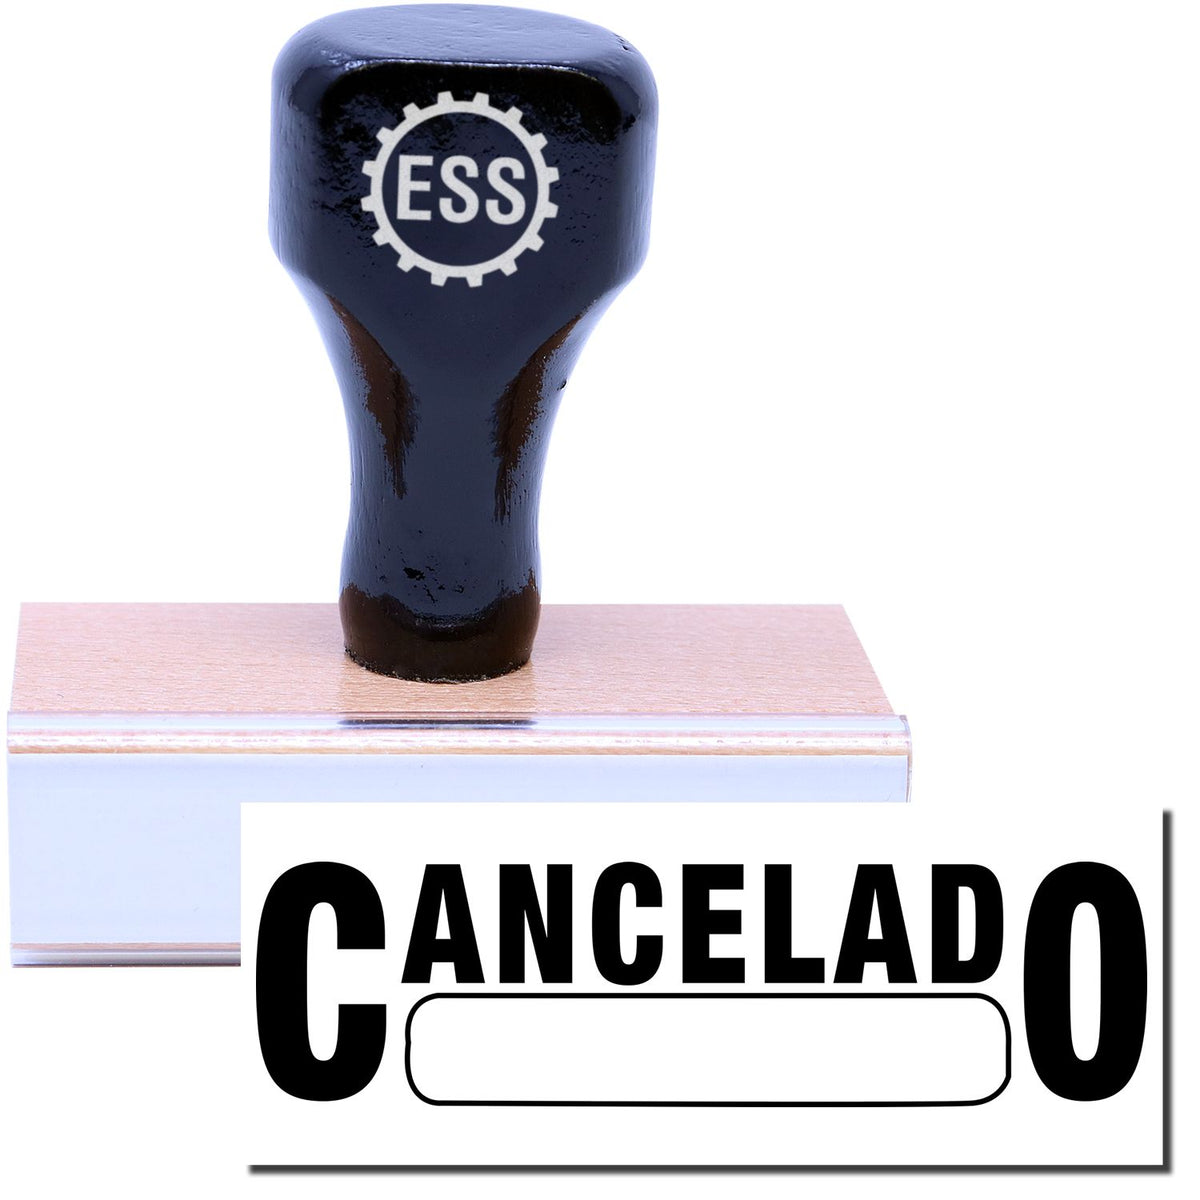 A stock office rubber stamp with a stamped image showing how the text &quot;CANCELADO&quot; with a box is displayed after stamping.